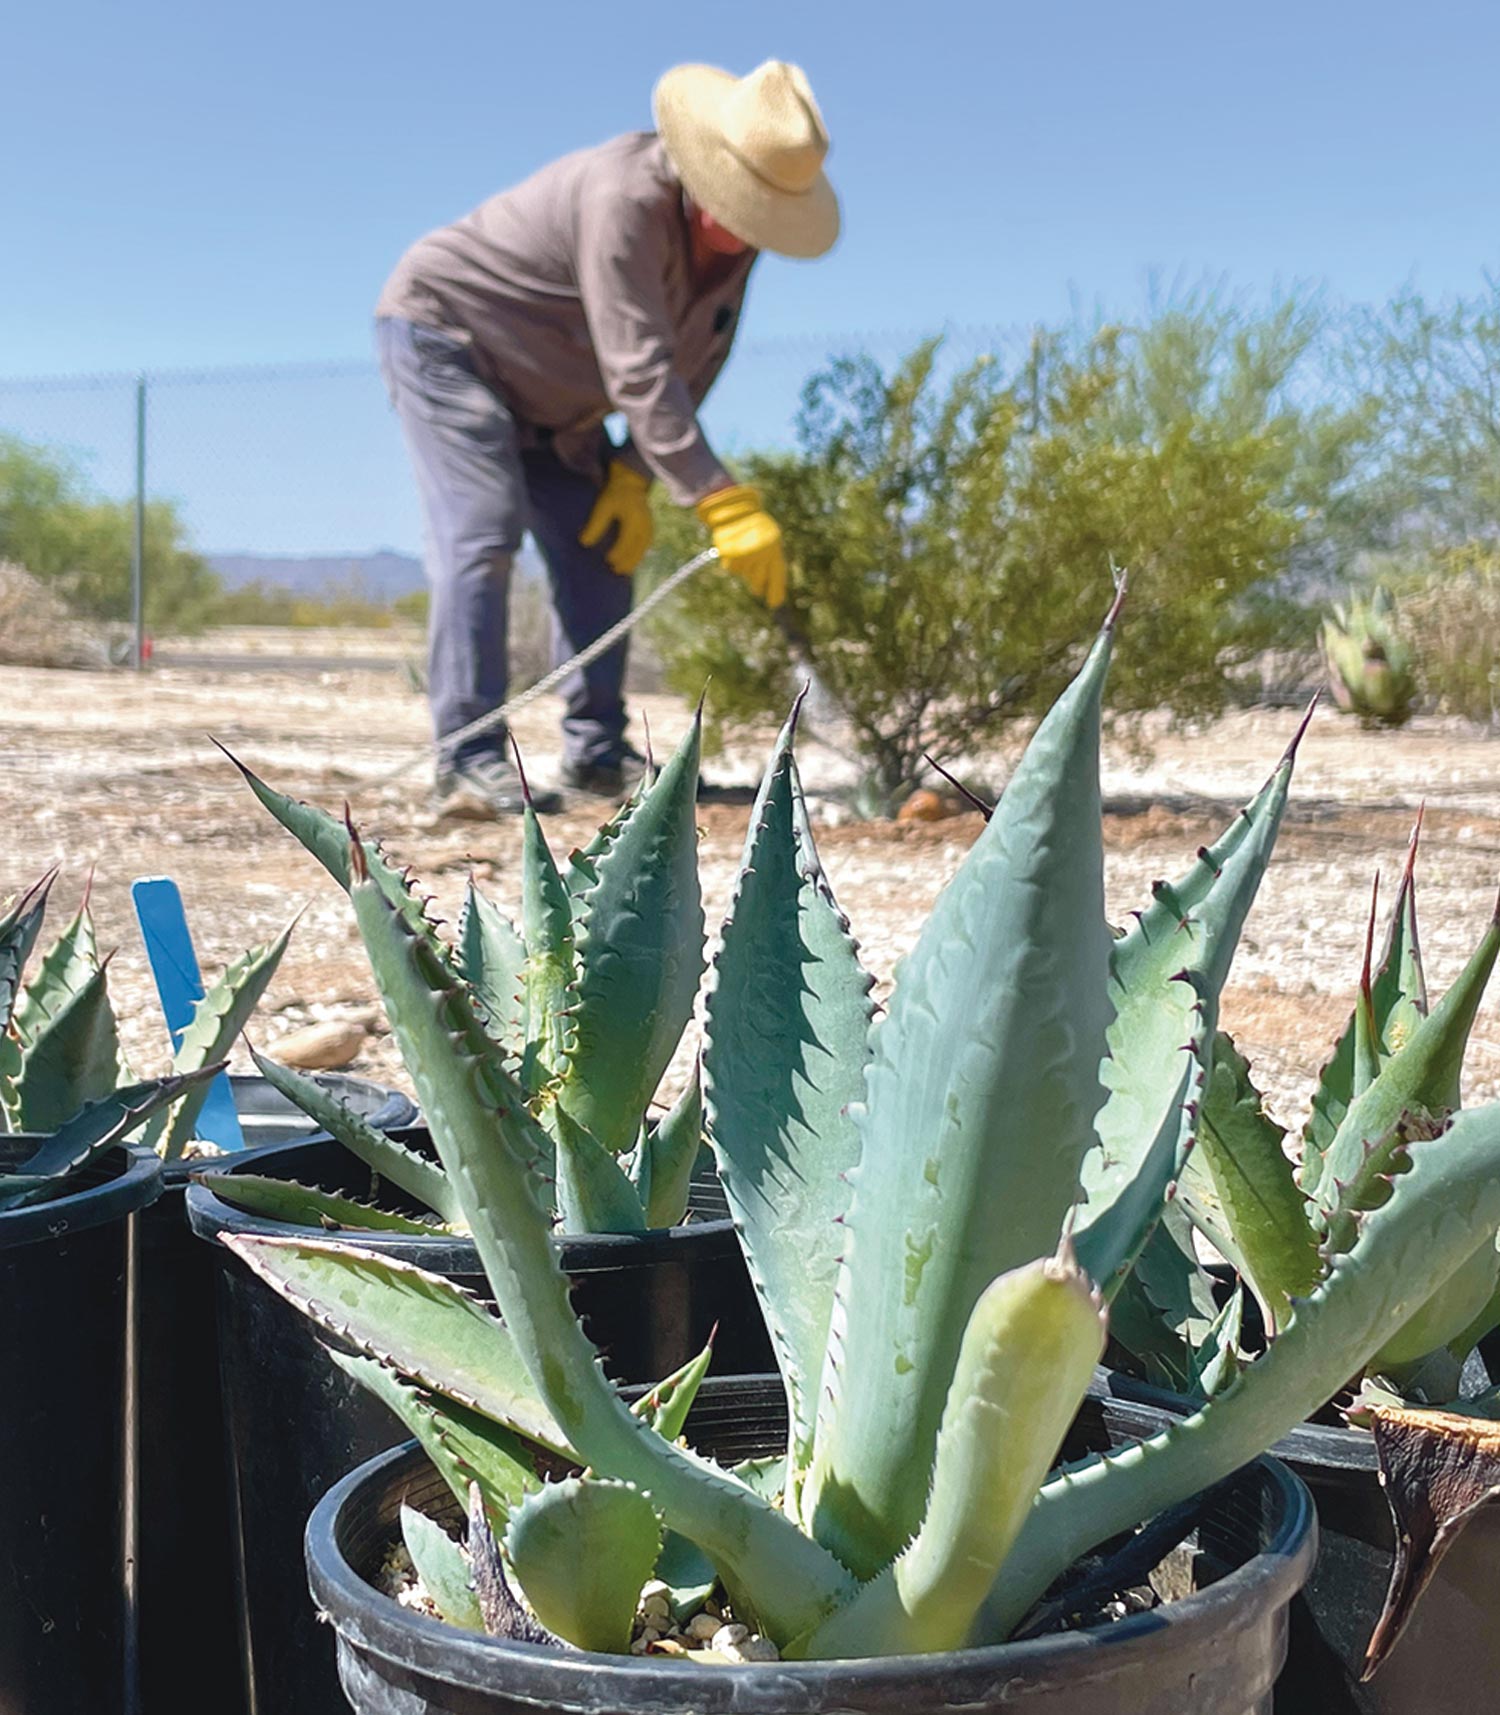 young agaves ready to be planted sit in the foreground while a person tends another plant in the background